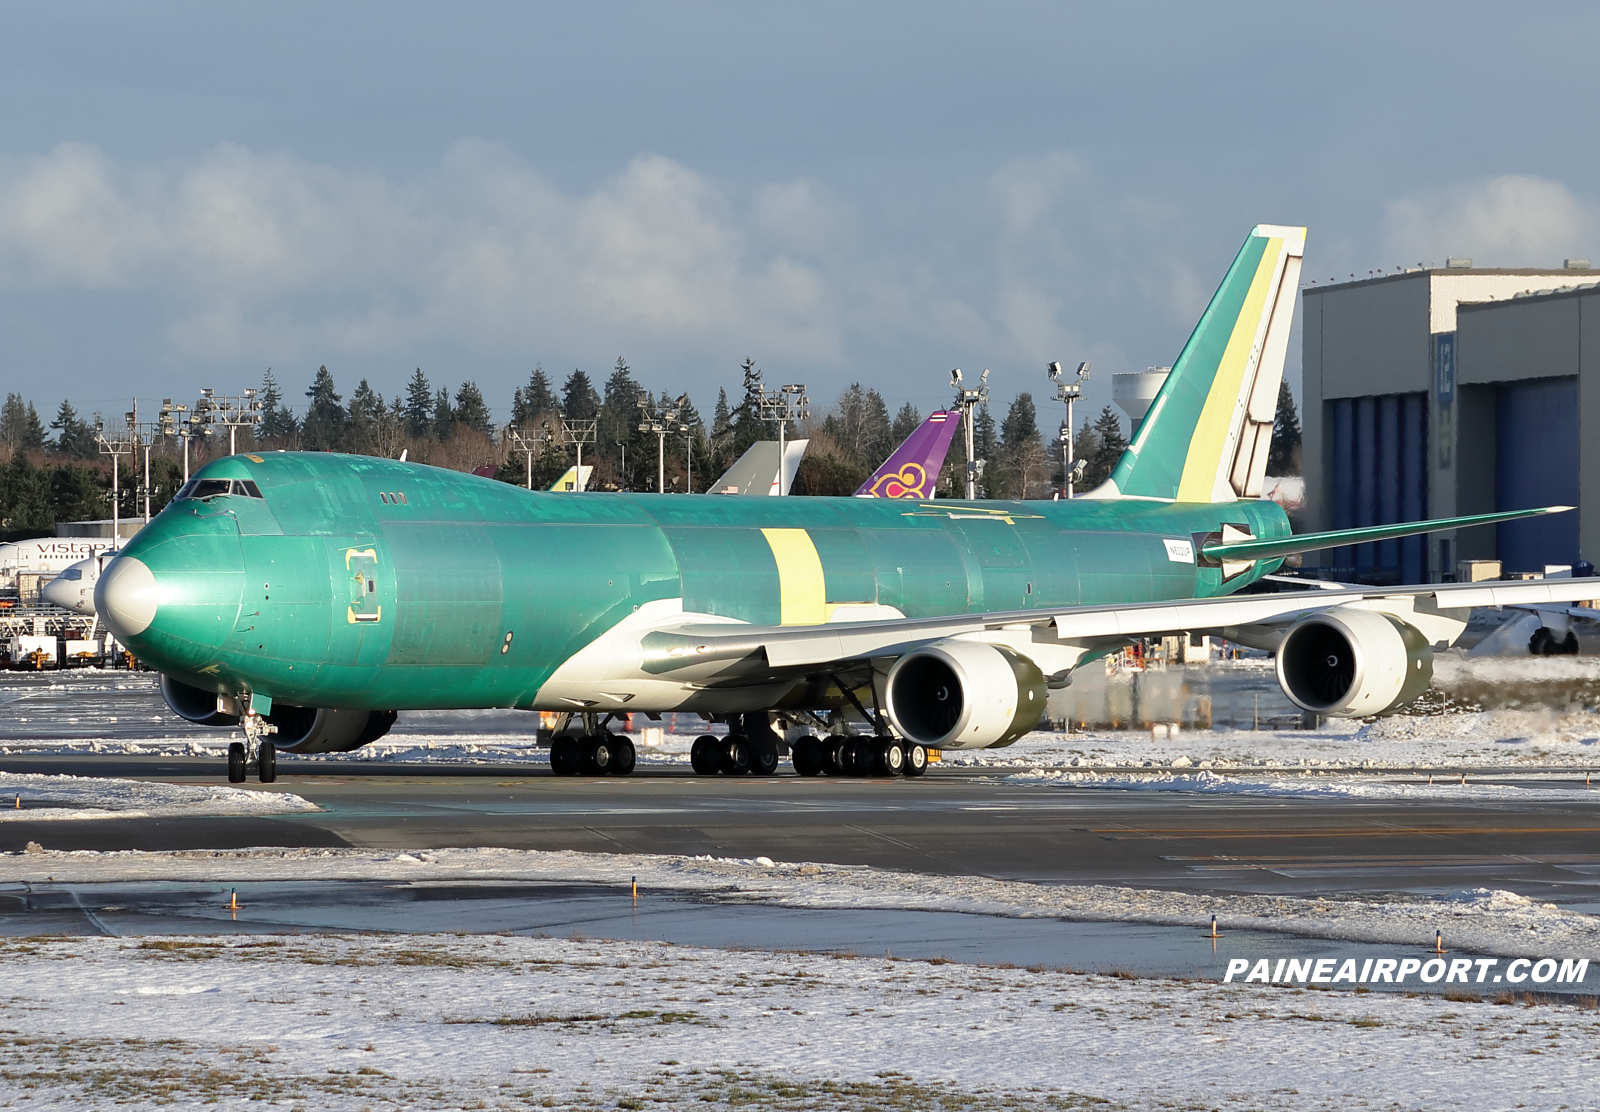 UPS 747-8F N632UP at KPAE Paine Field